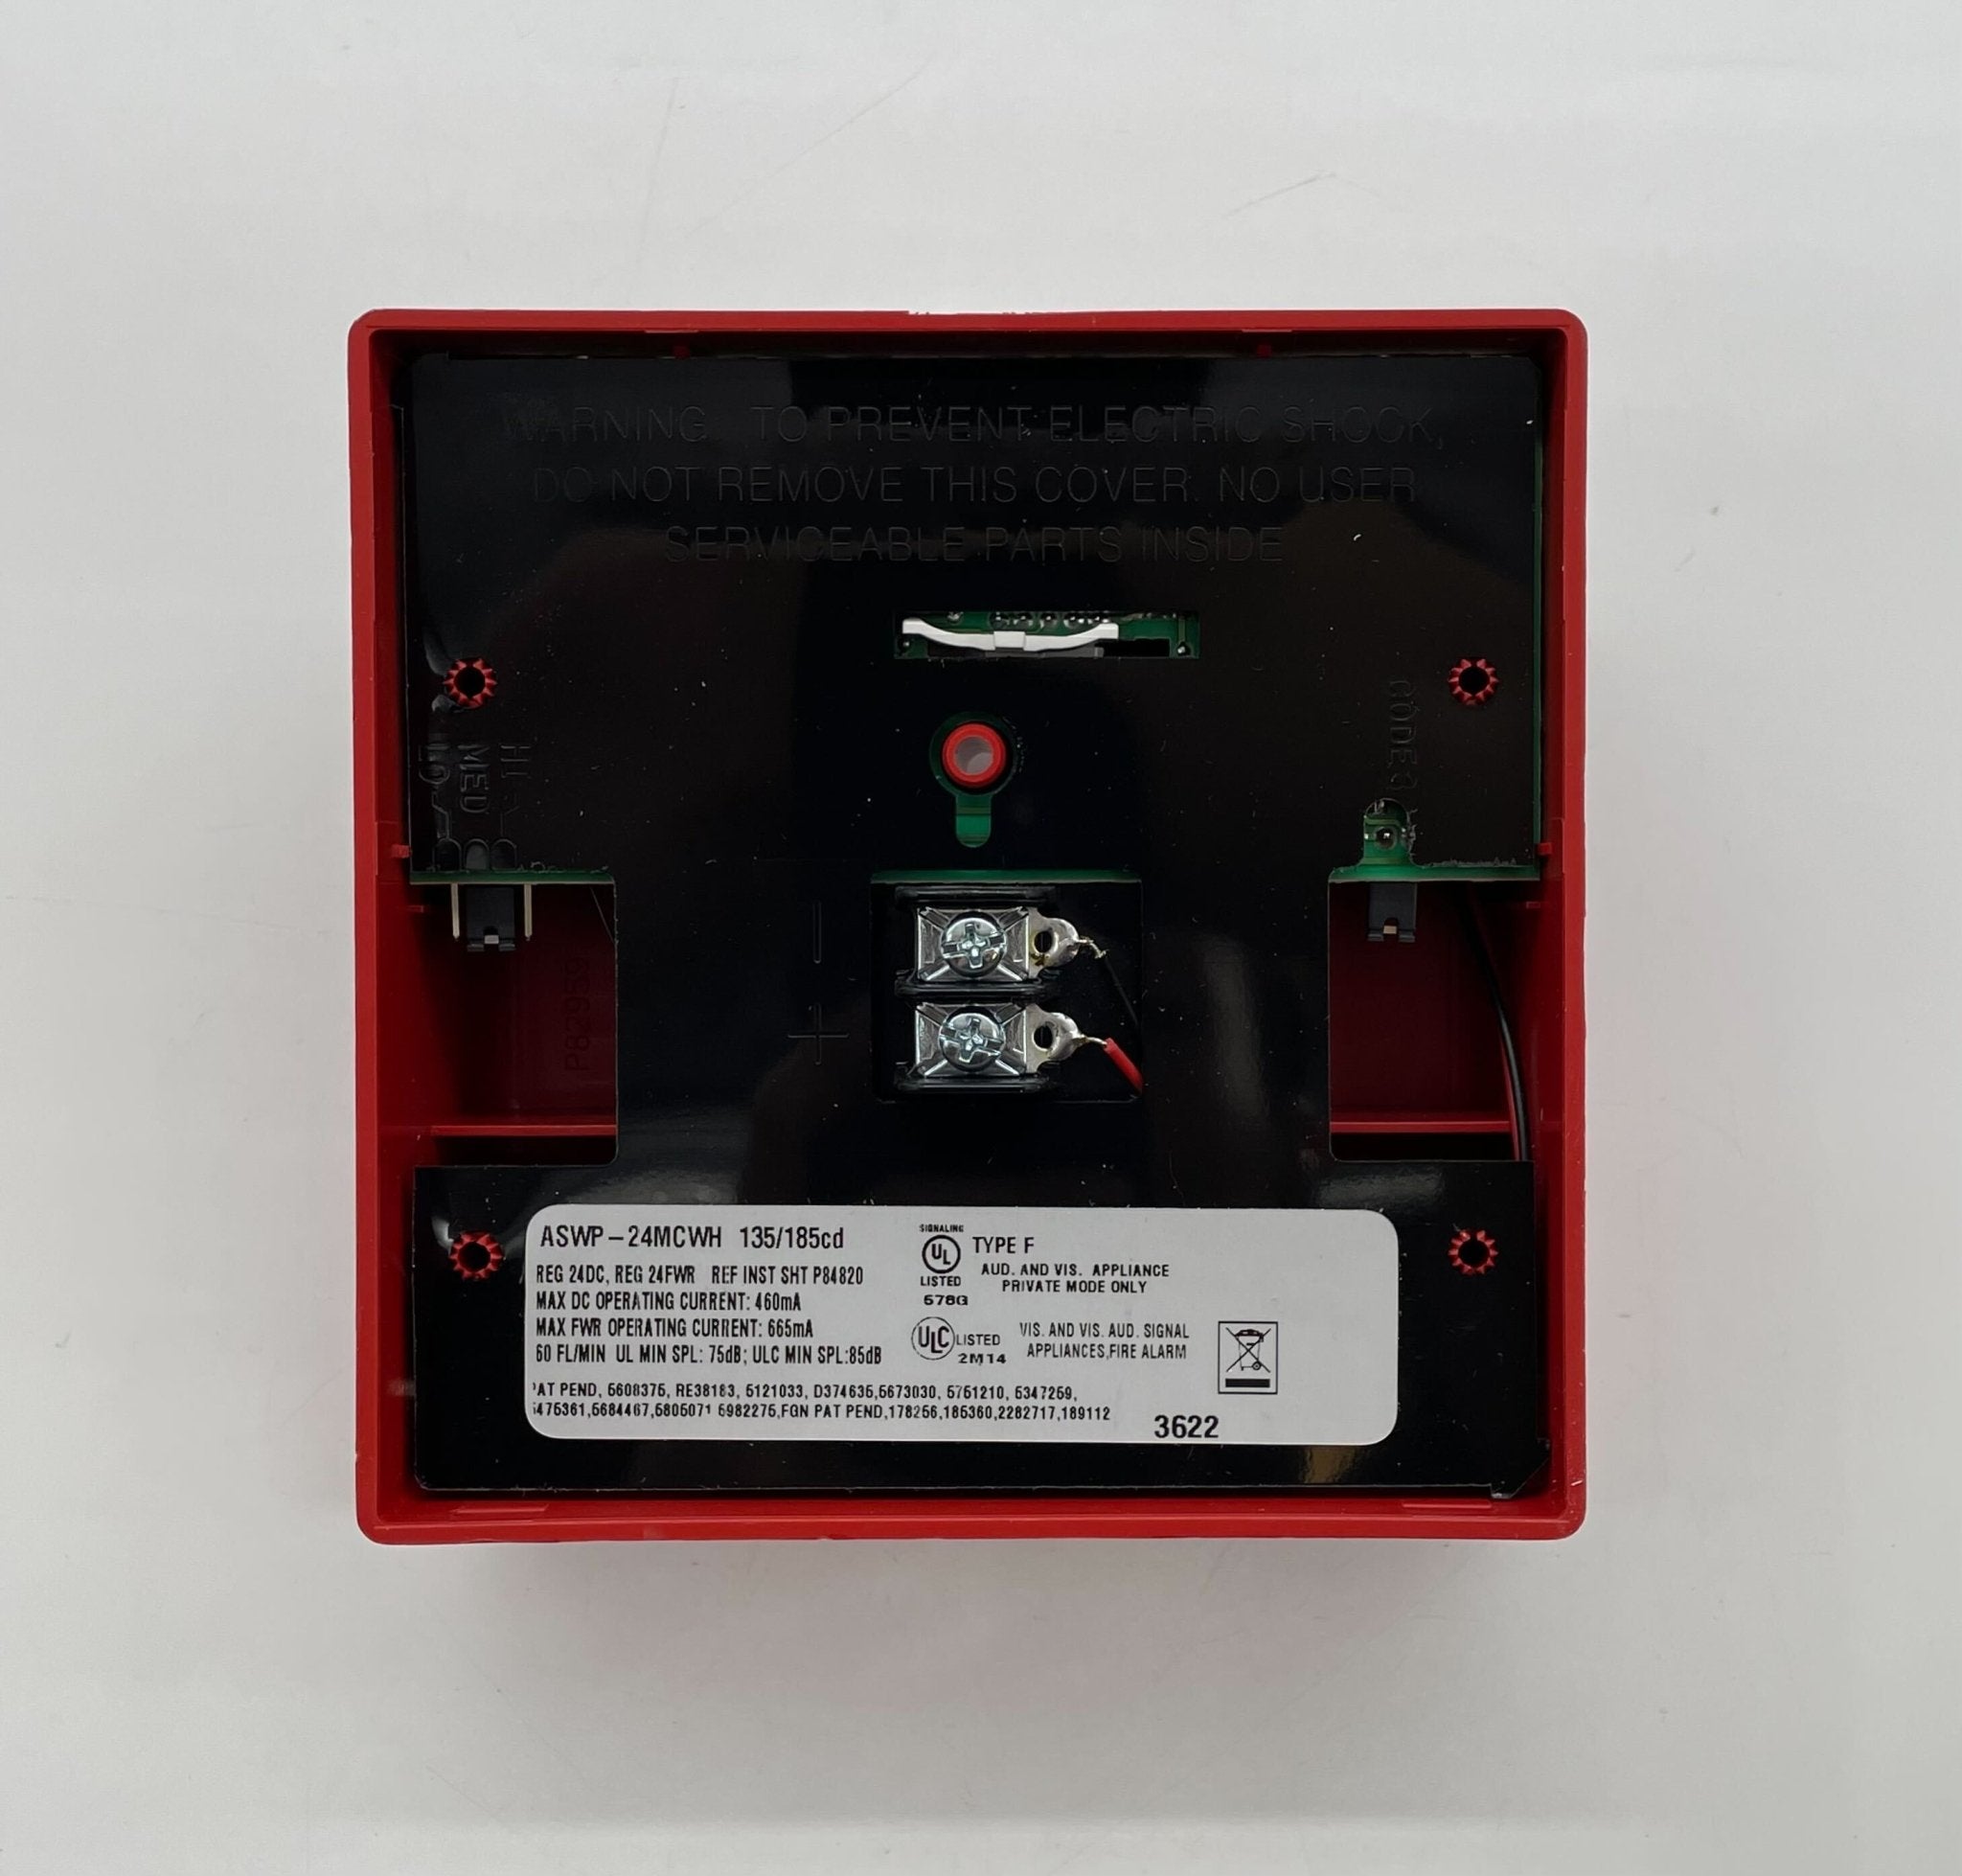 Wheelock ASWP-24MCWH-FR - The Fire Alarm Supplier